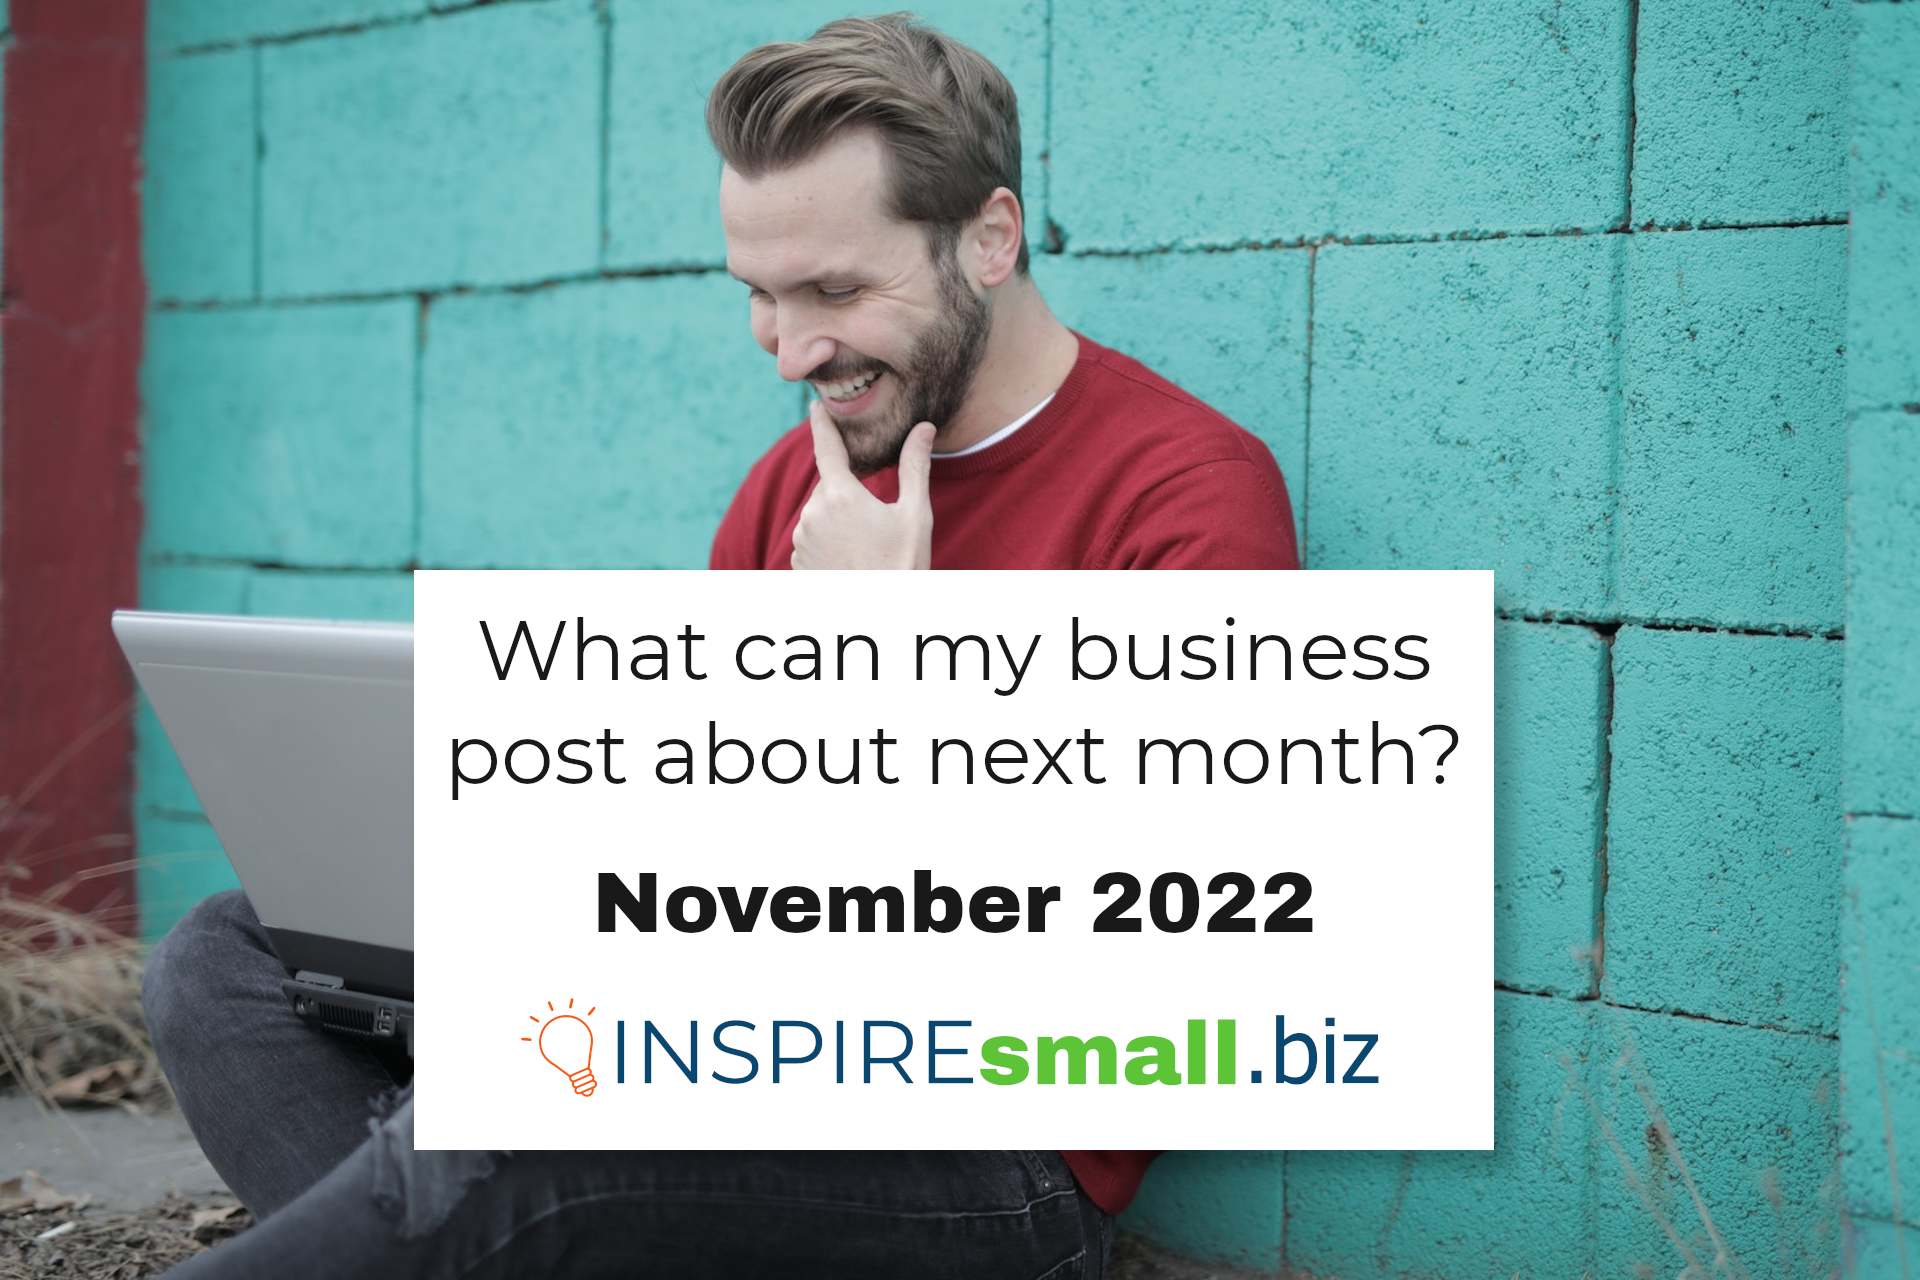 What can my business post about next month? November 2022